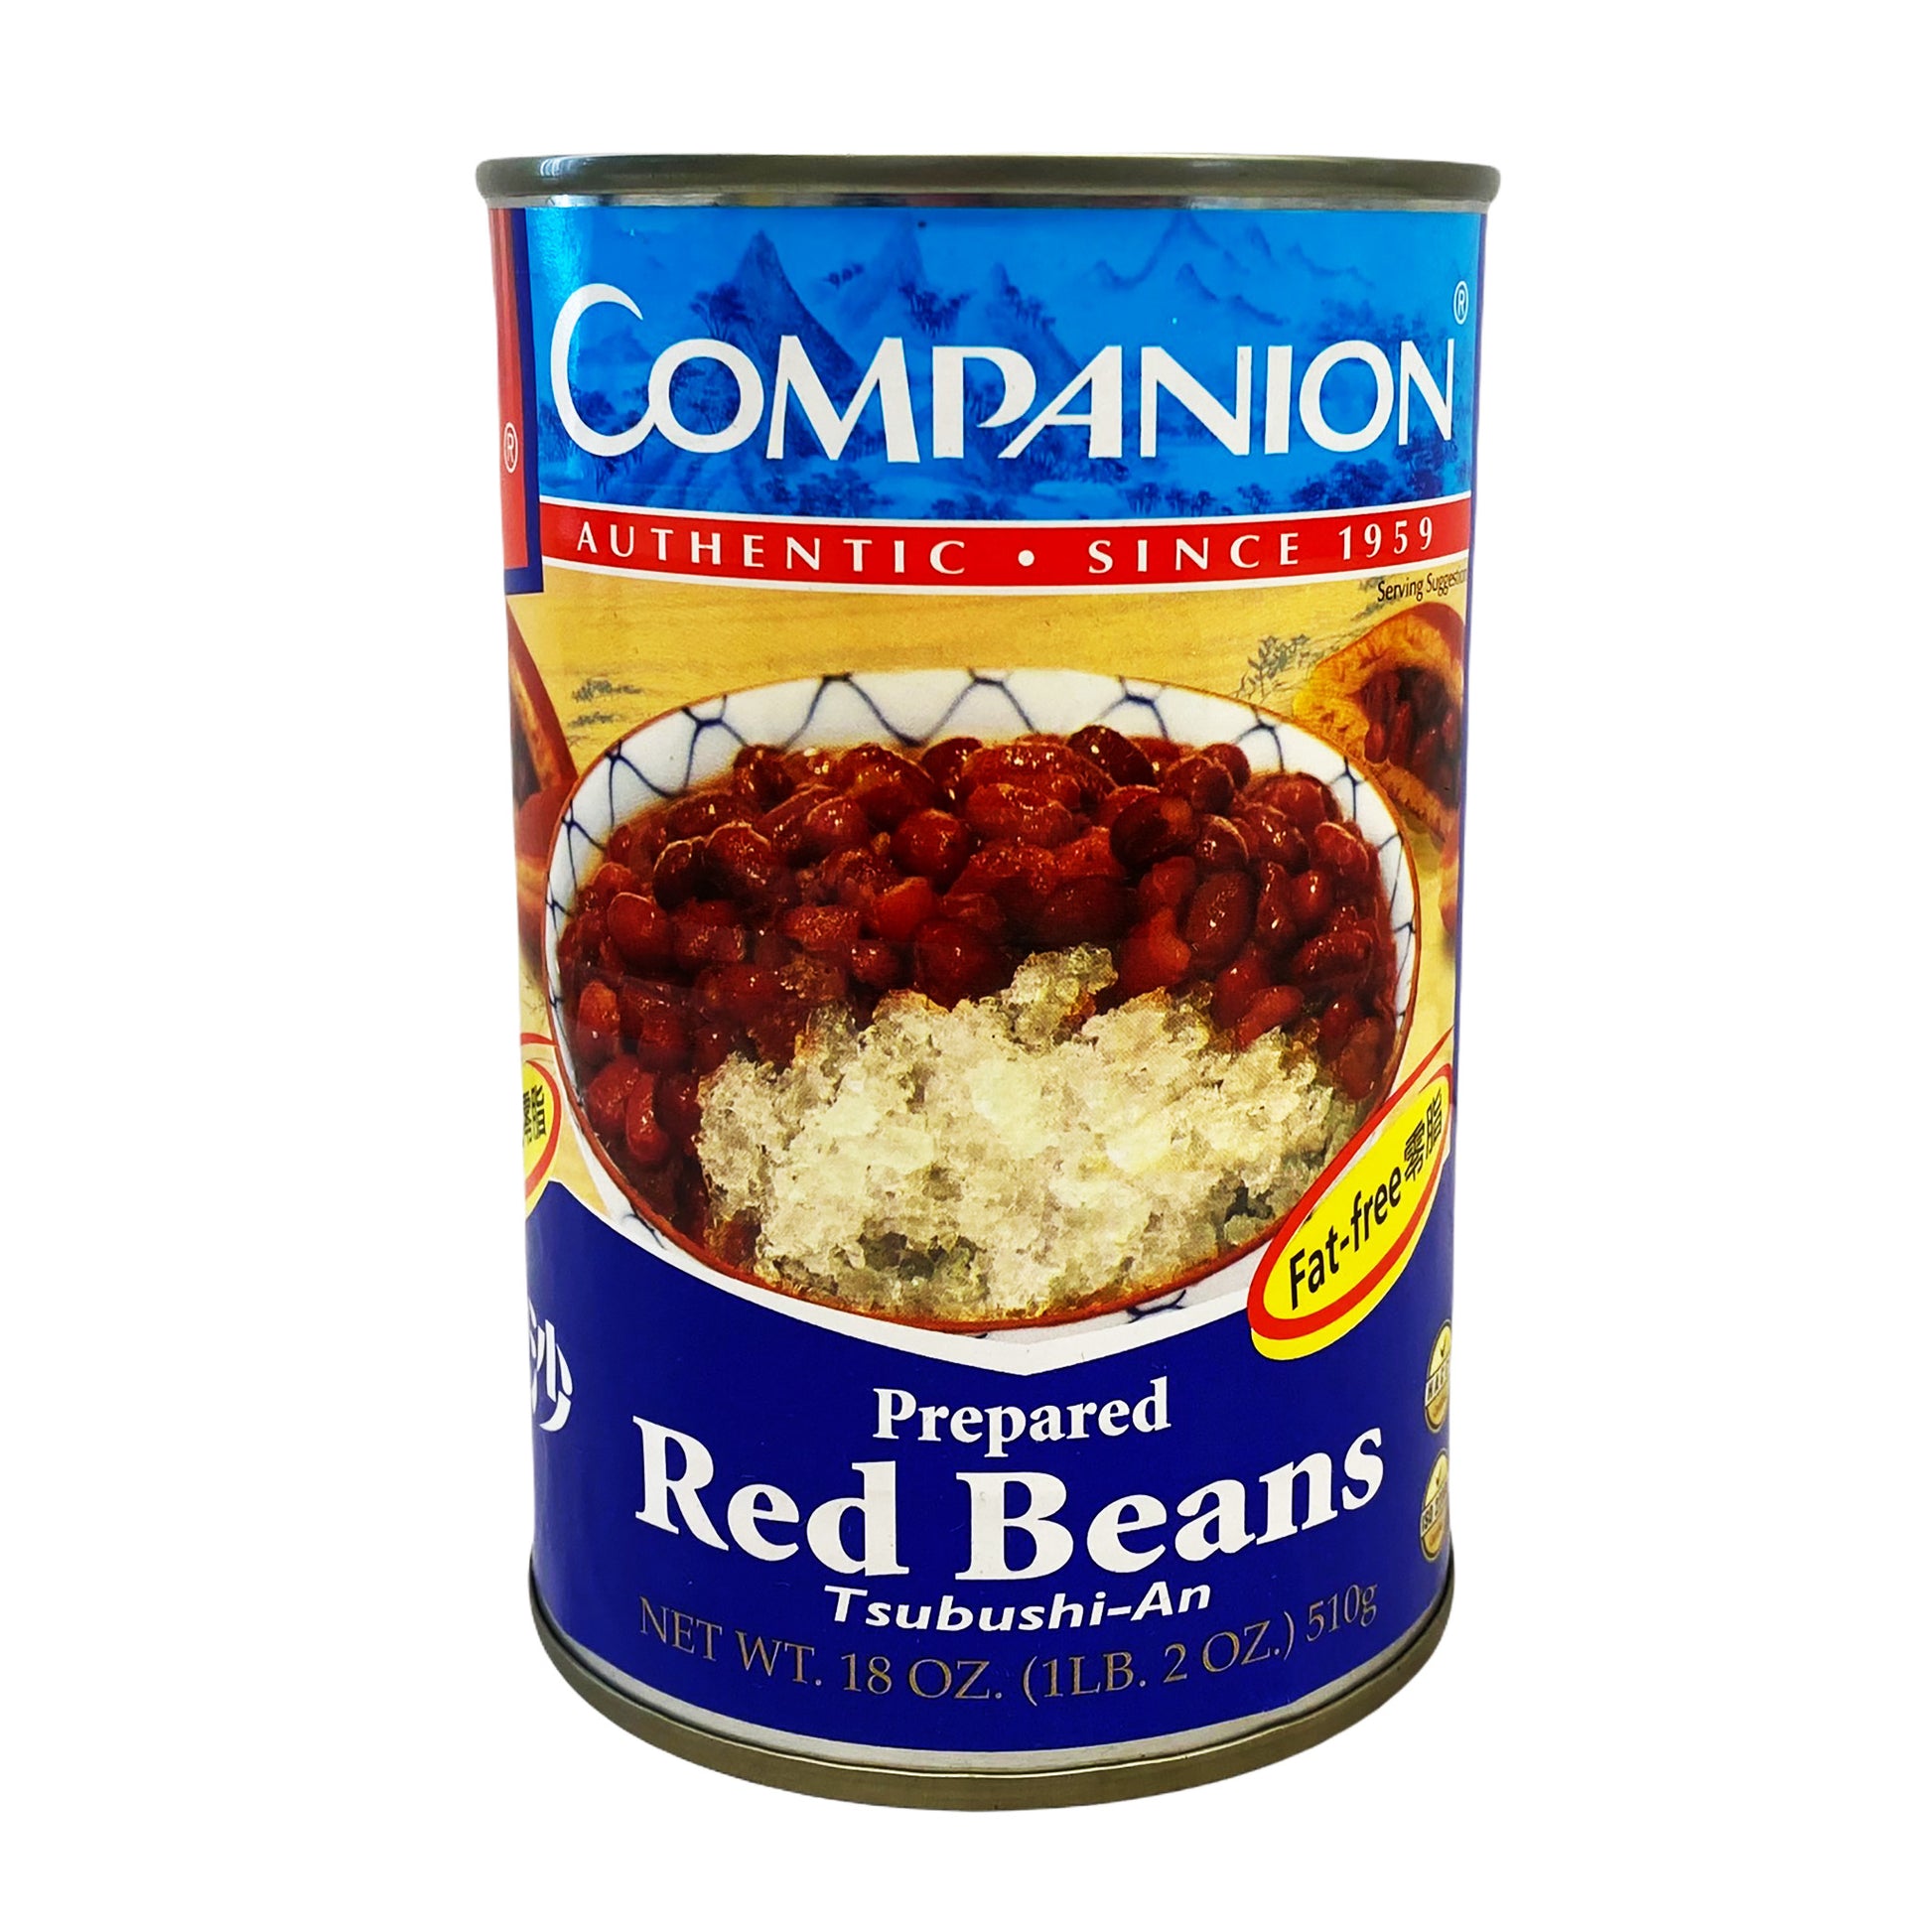 Front graphic image of Companion Fat-free Prepared Red Beans 18oz (510g) - 良友 零脂红豆沙 18oz (510g)